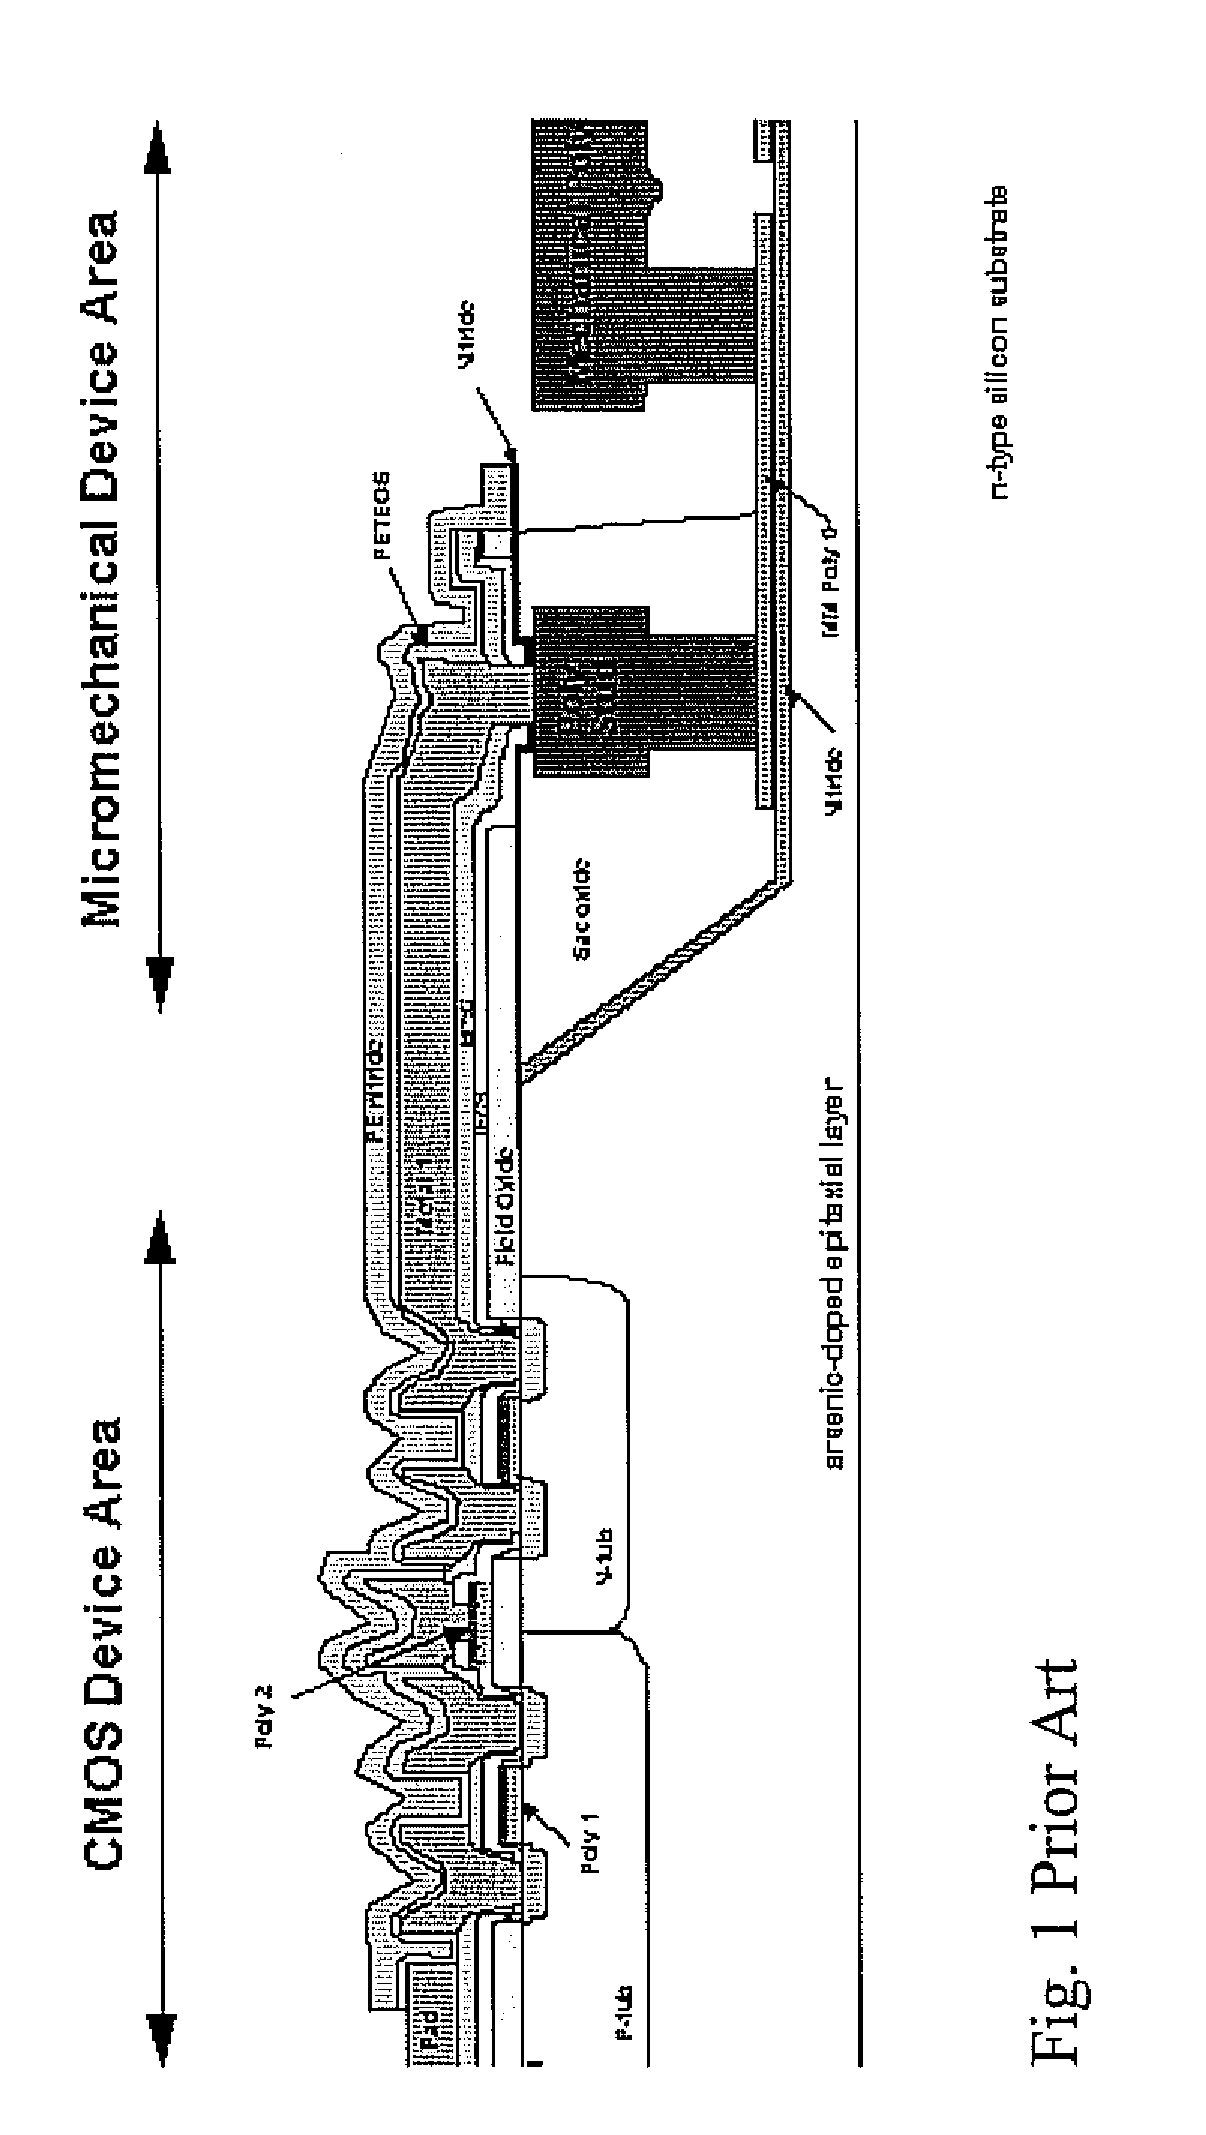 Method of forming monolithic CMOS-MEMS hybrid integrated, packaged structures